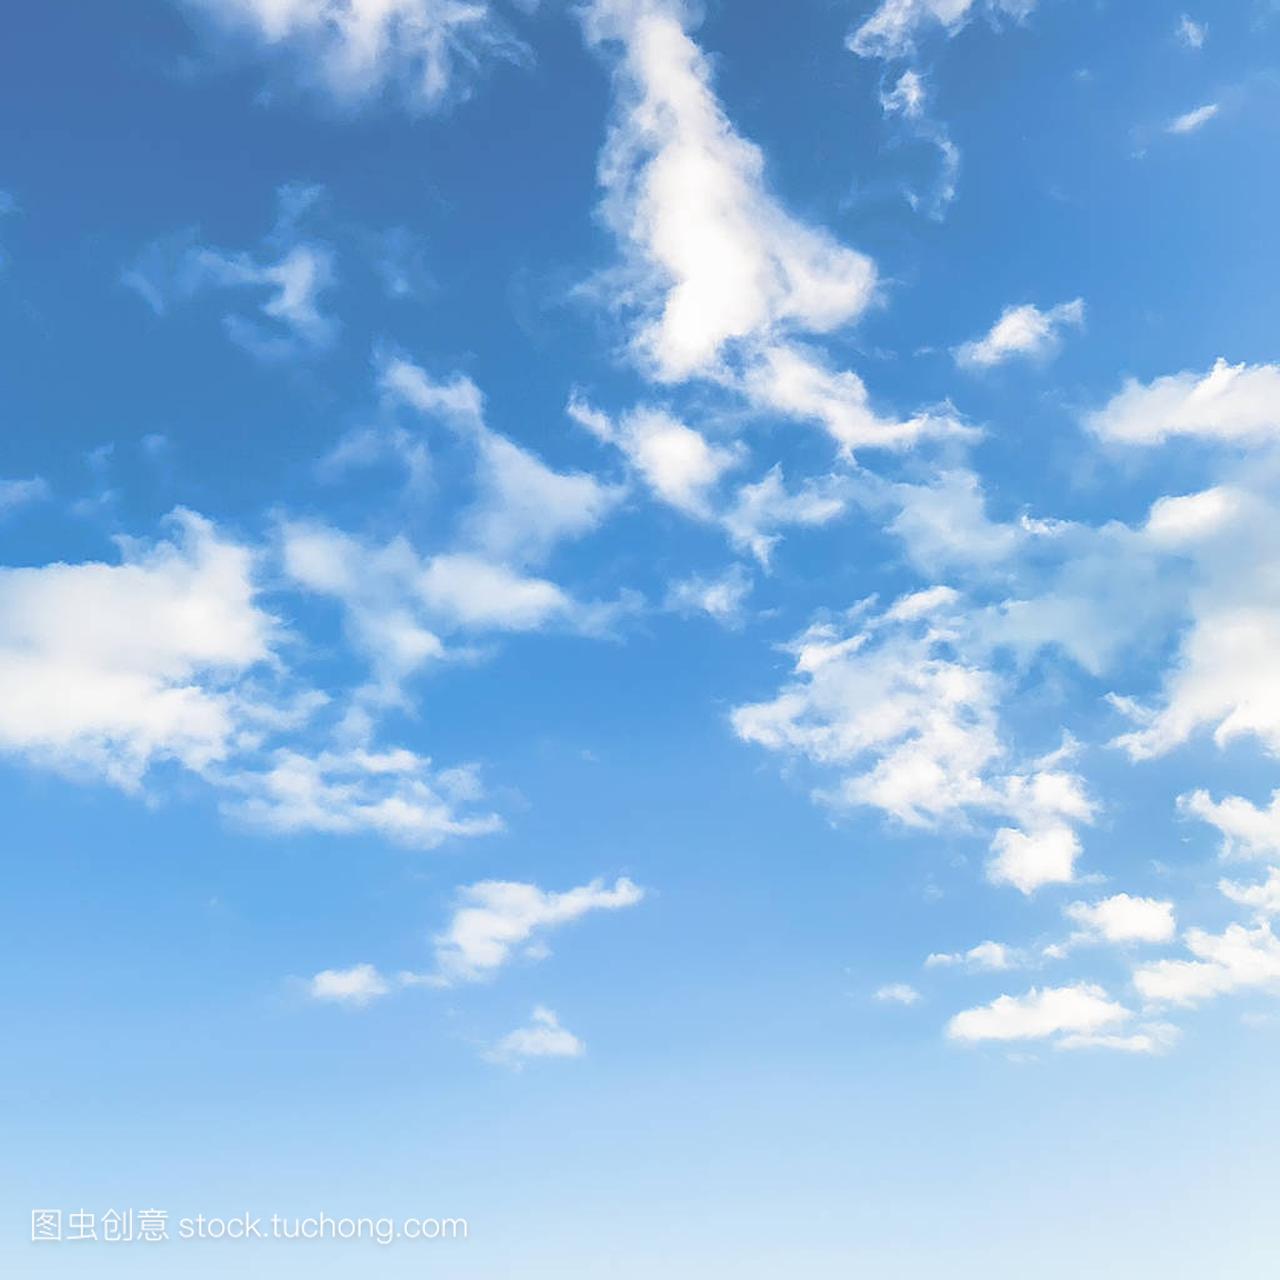 Innocent blue sky with white fluffy clouds